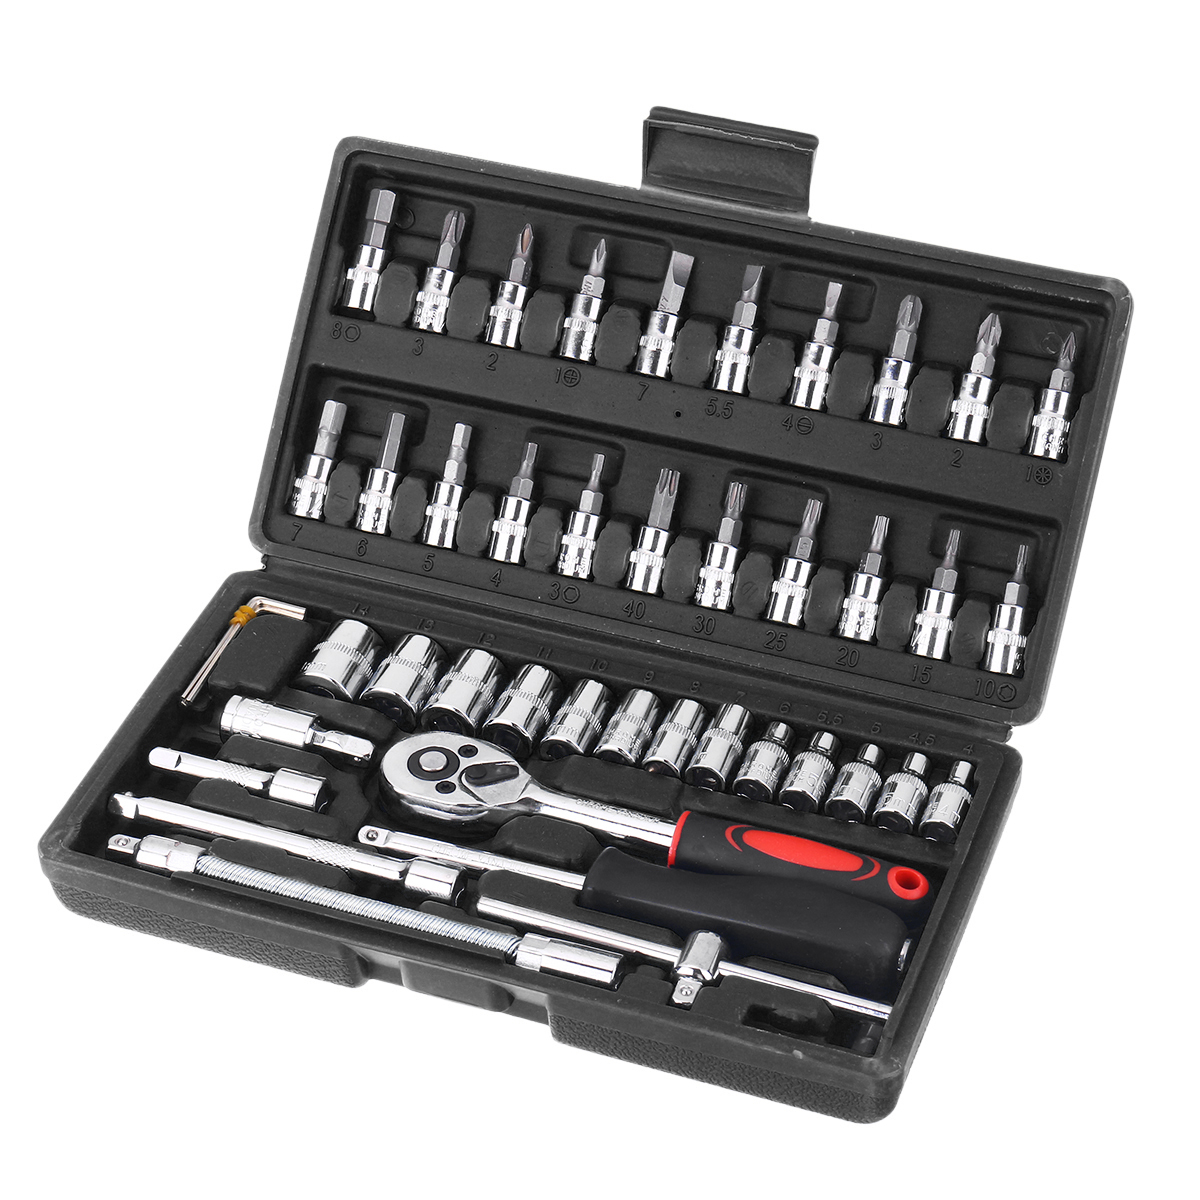 Find 46pcs Socket Ratchet Screwdriver Wrench Set 1/4 Drive Flexible Car Repair Tool for Sale on Gipsybee.com with cryptocurrencies